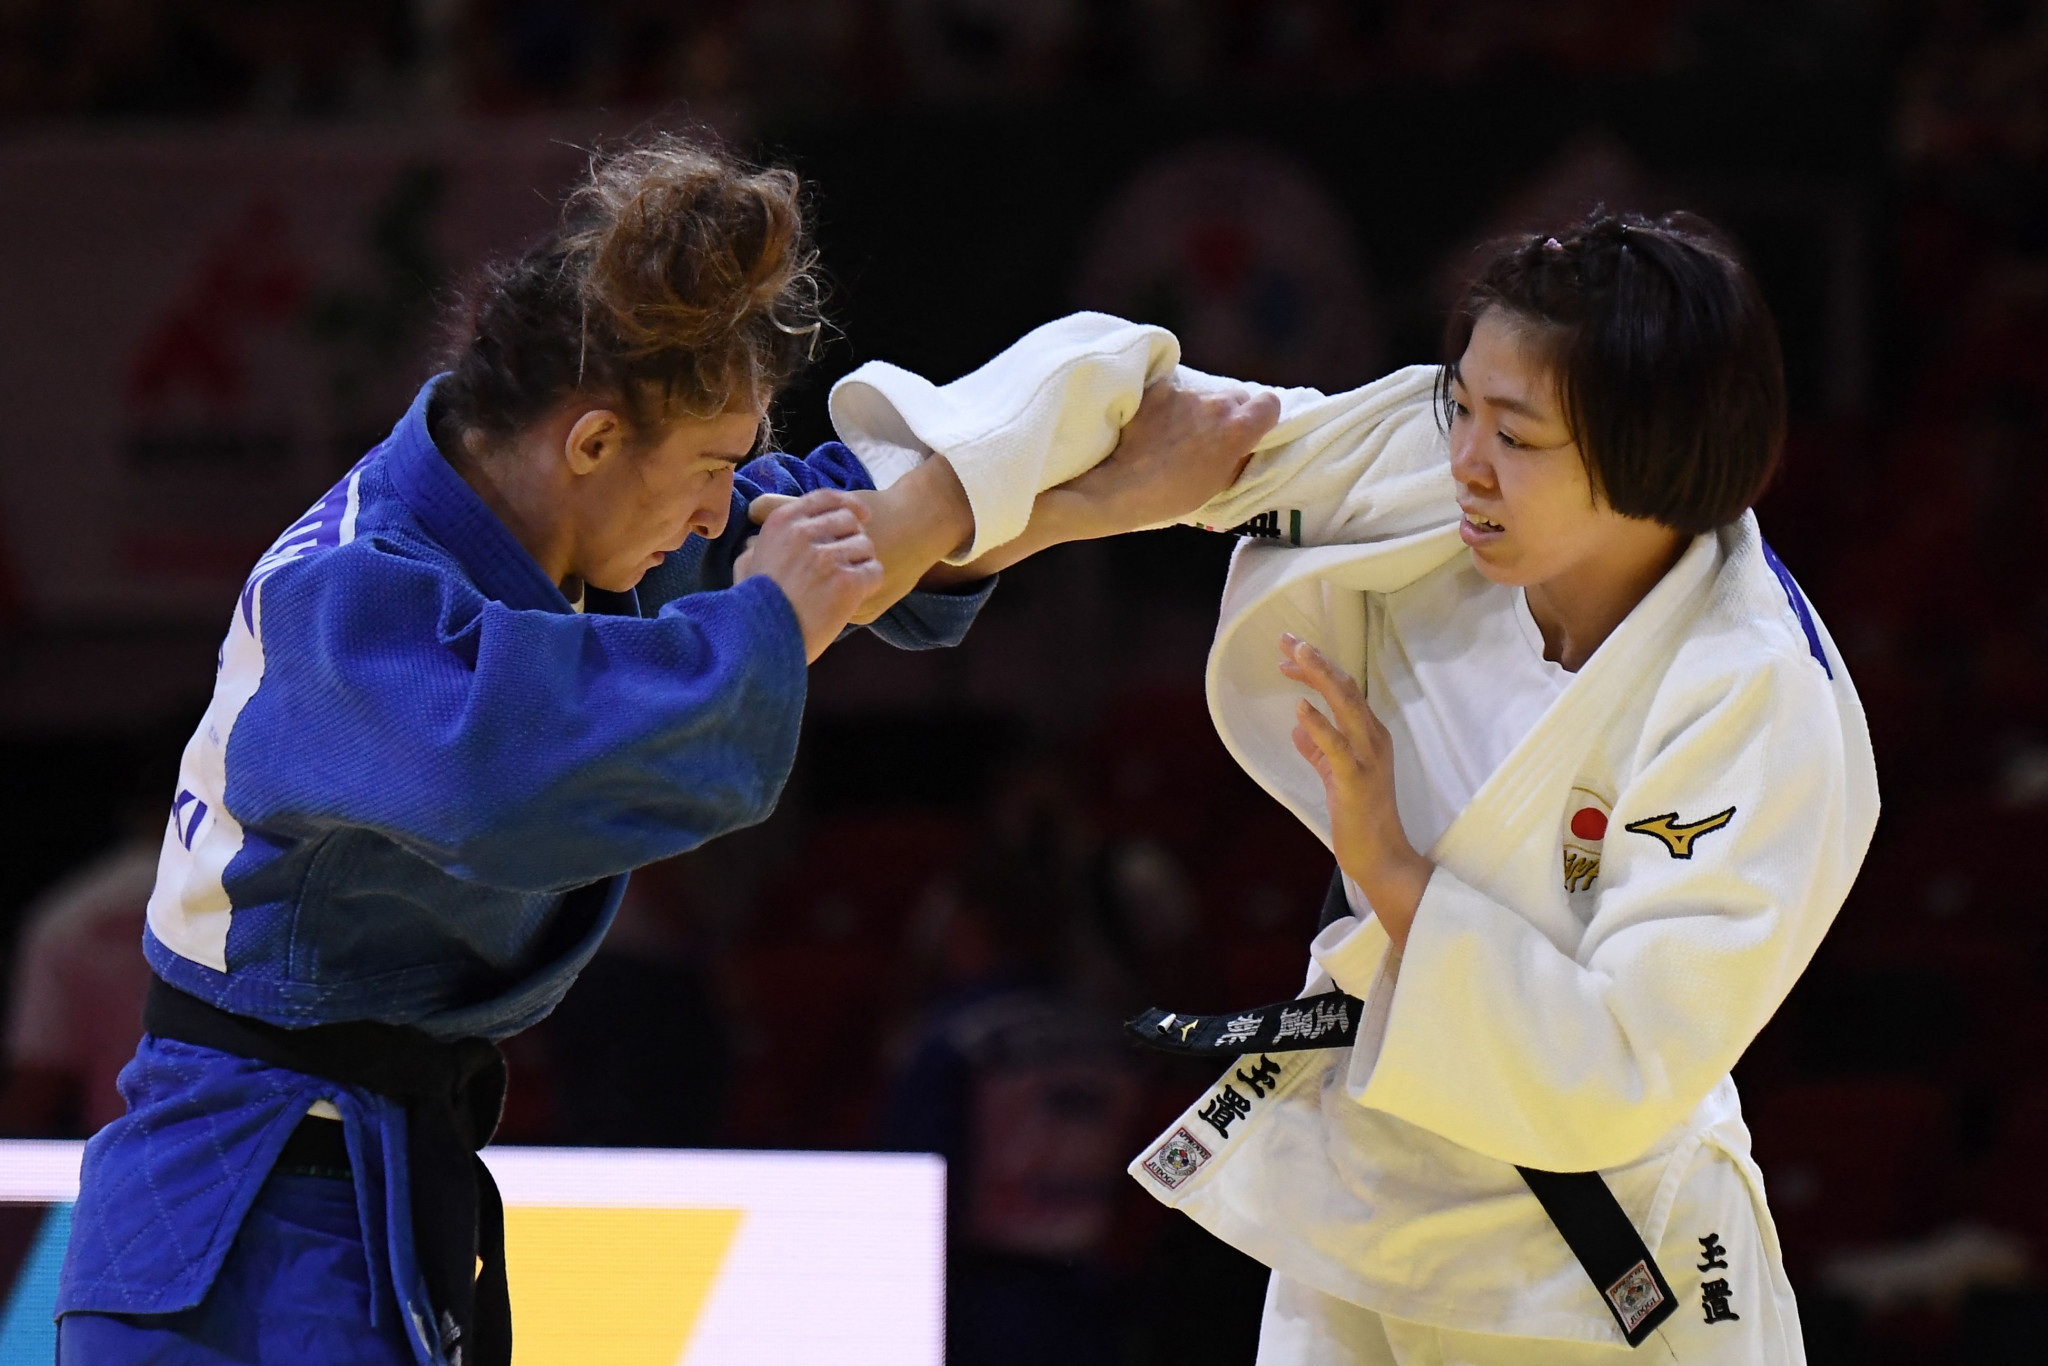 Momo Tamaoki won gold in the women's under-57kg division at the Baku Grand Slam ©Getty Images